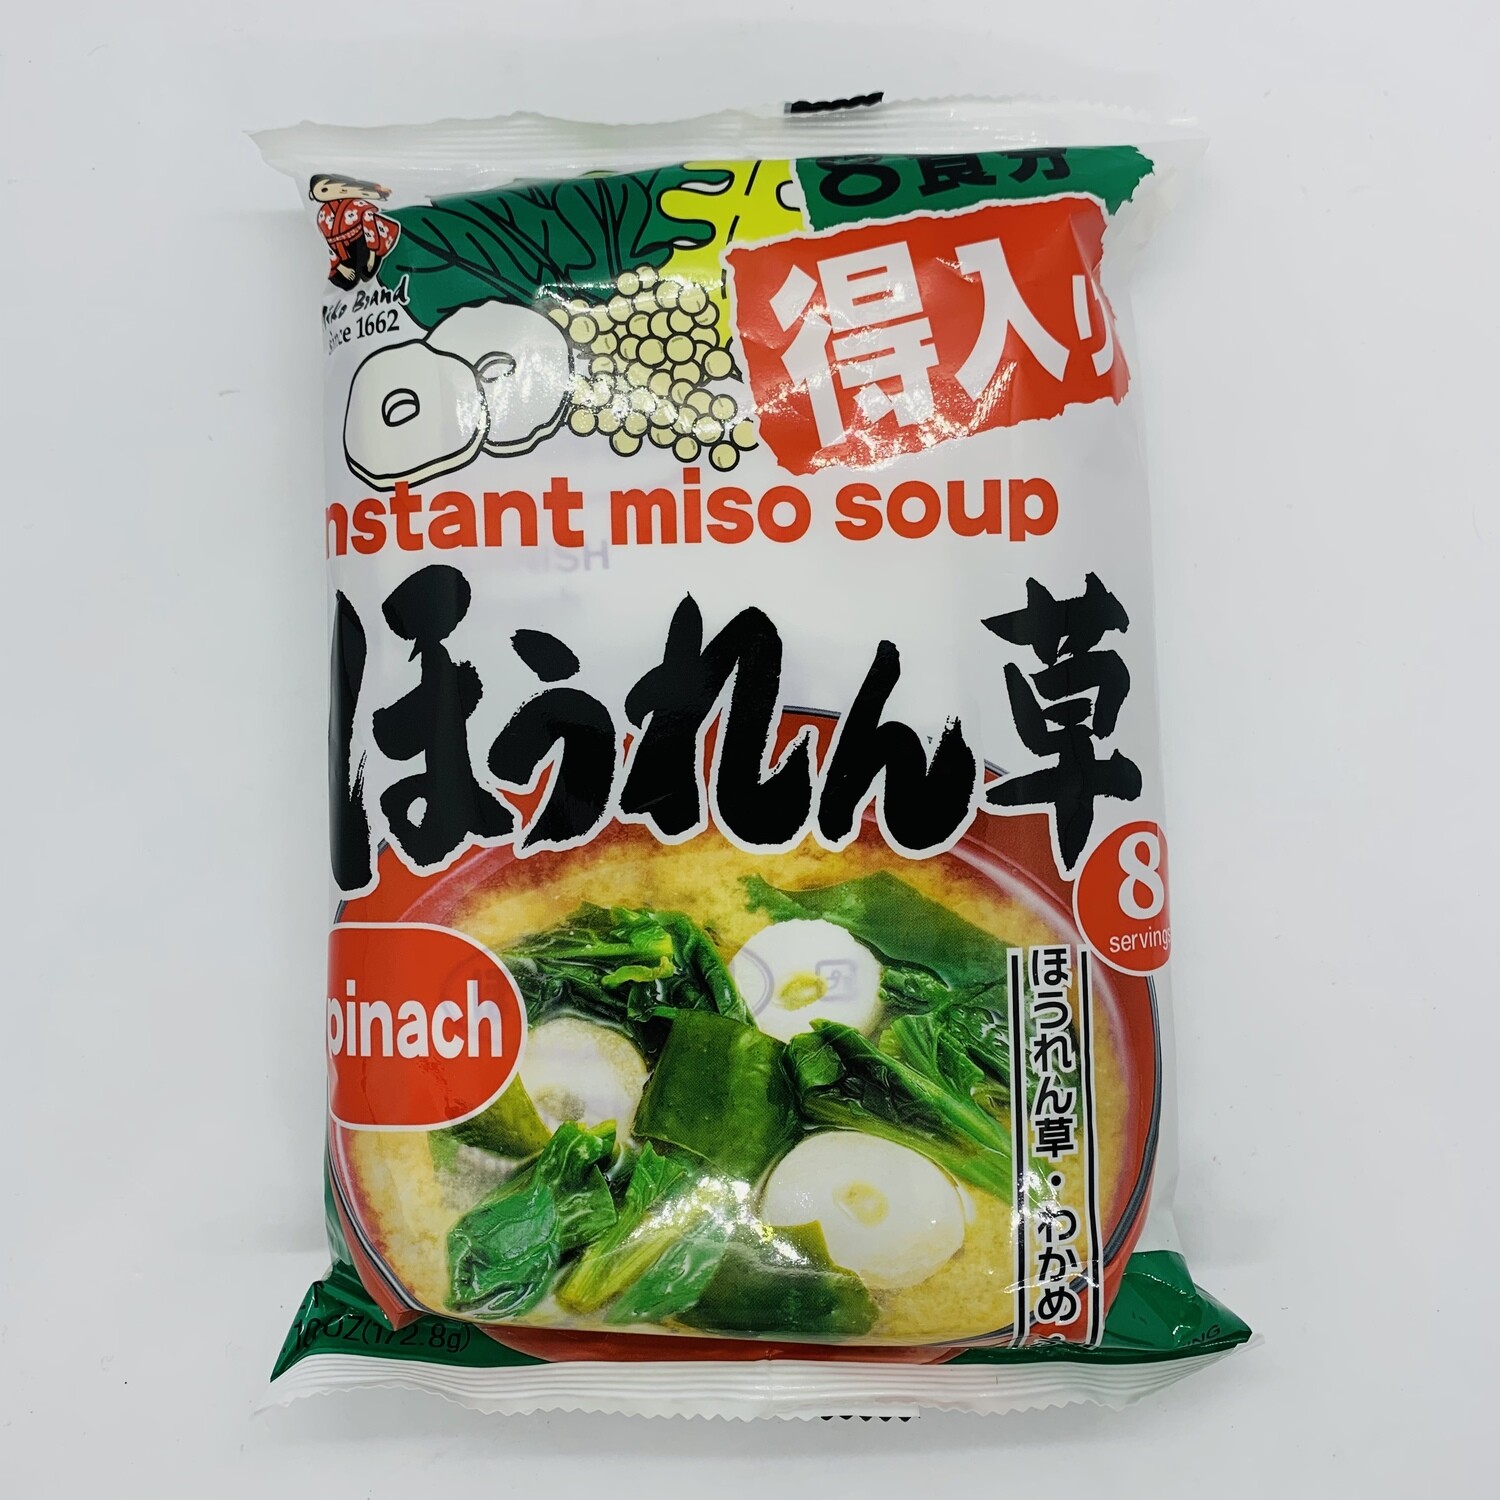 SHINSHUICHI Instant Miso Soup Spinach